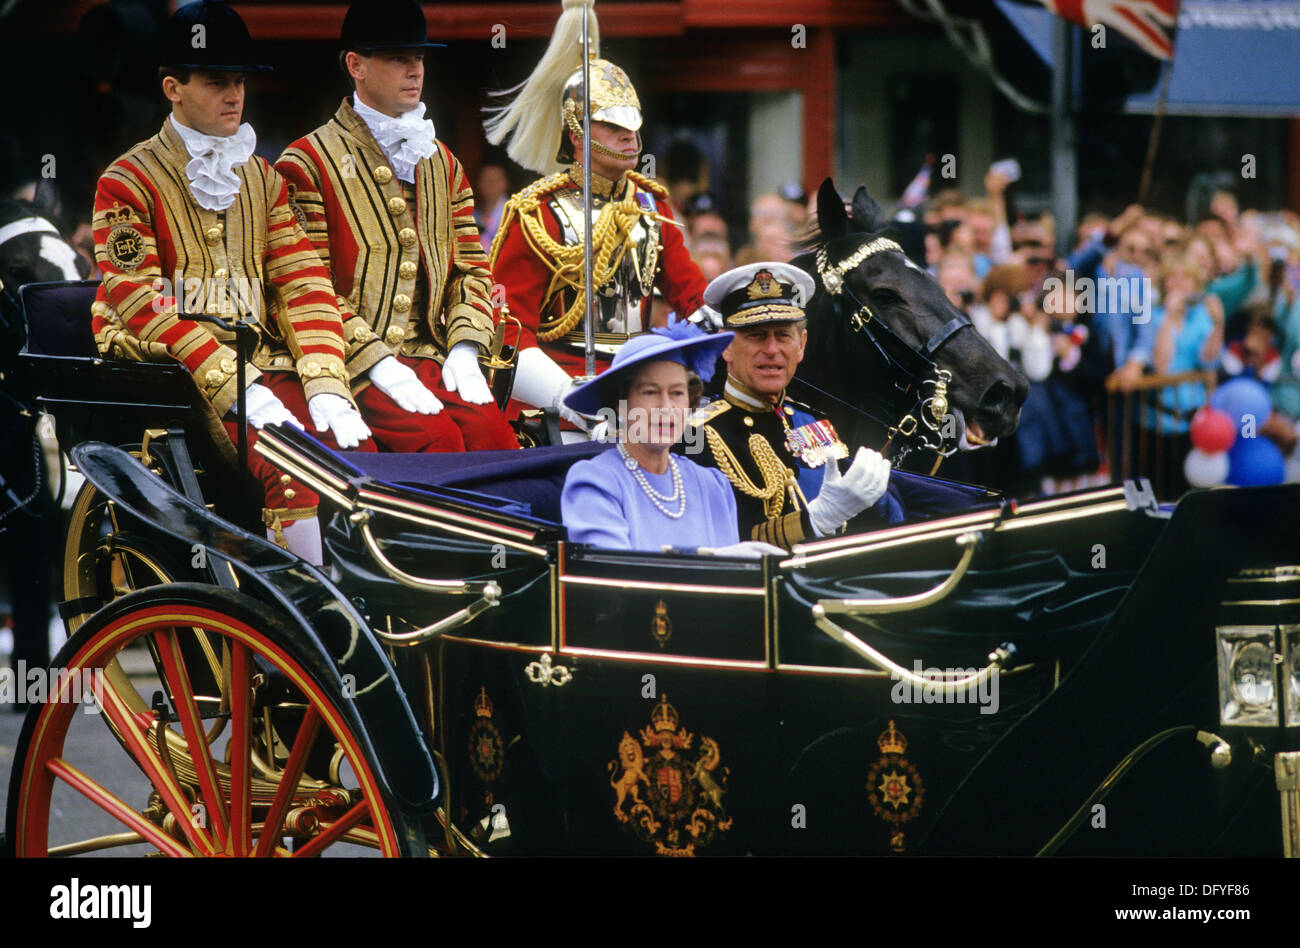 The Wedding of Prince Andrew to Sarah Ferguson, London. July 1986. HM The Queen, Queen Elizabeth II, Prince Philip en route Stock Photo